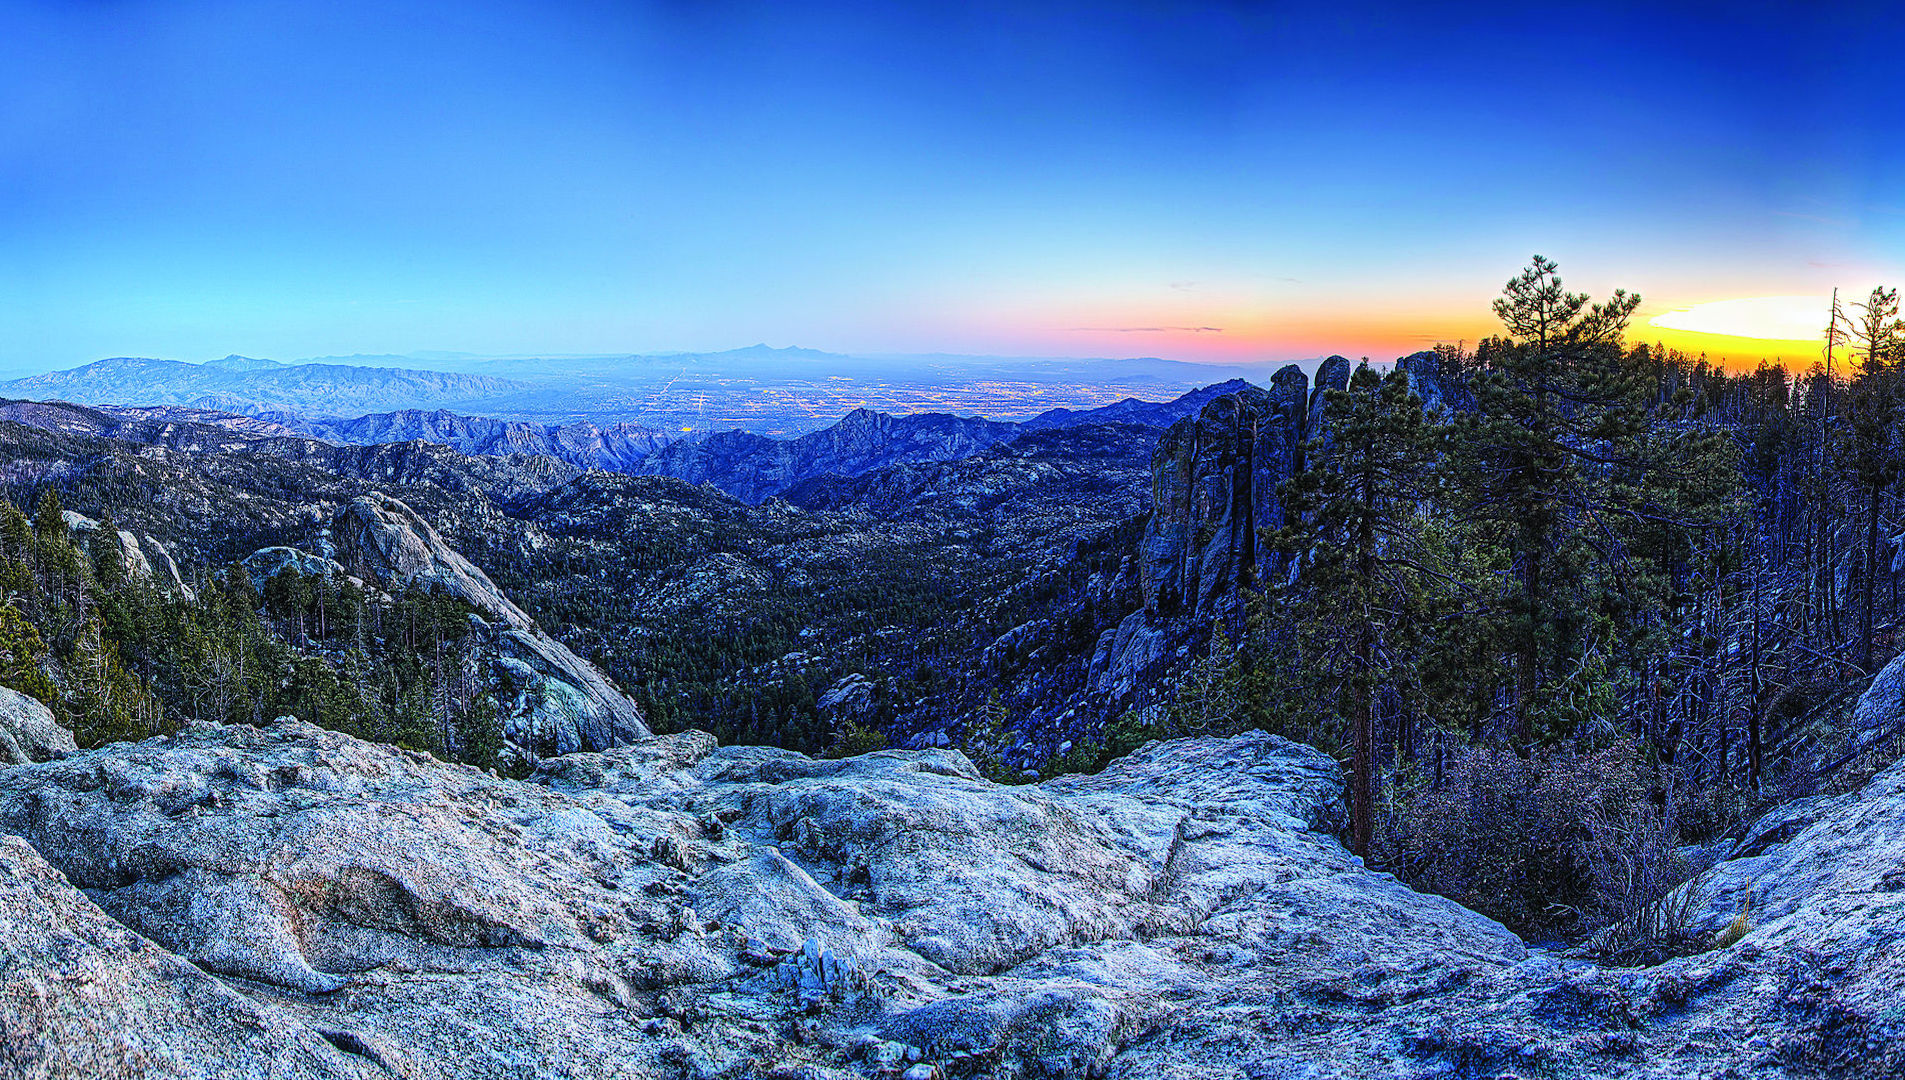 The granite gray summit of Mount Lemmon topped with vibrant colorful streaks across a cold morning sky.